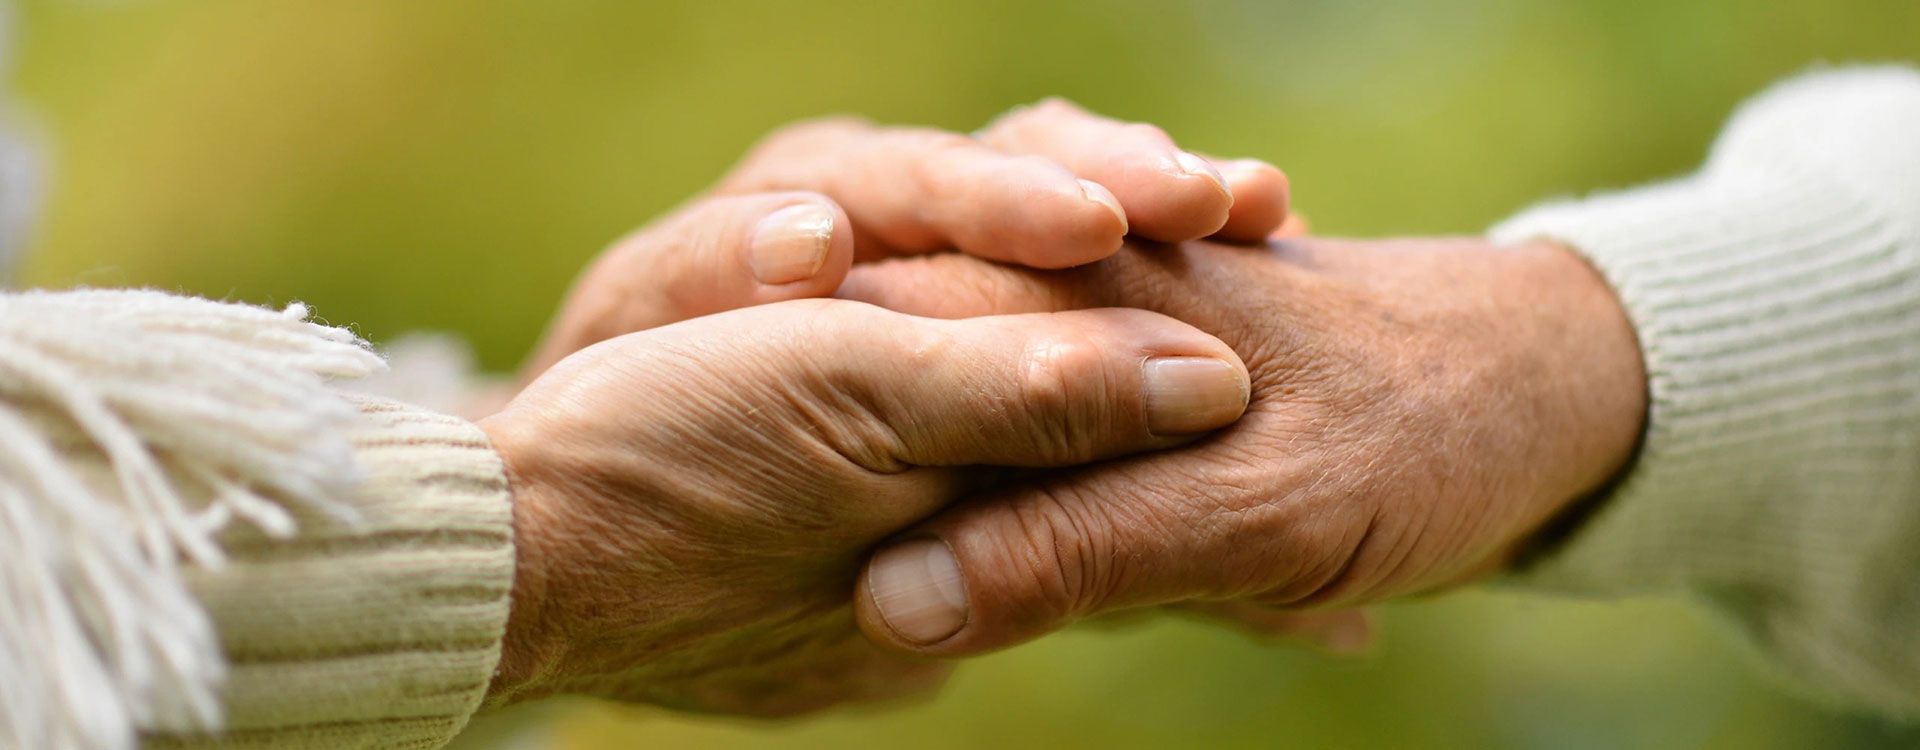 The love of God displayed between an elderly couple holding hands